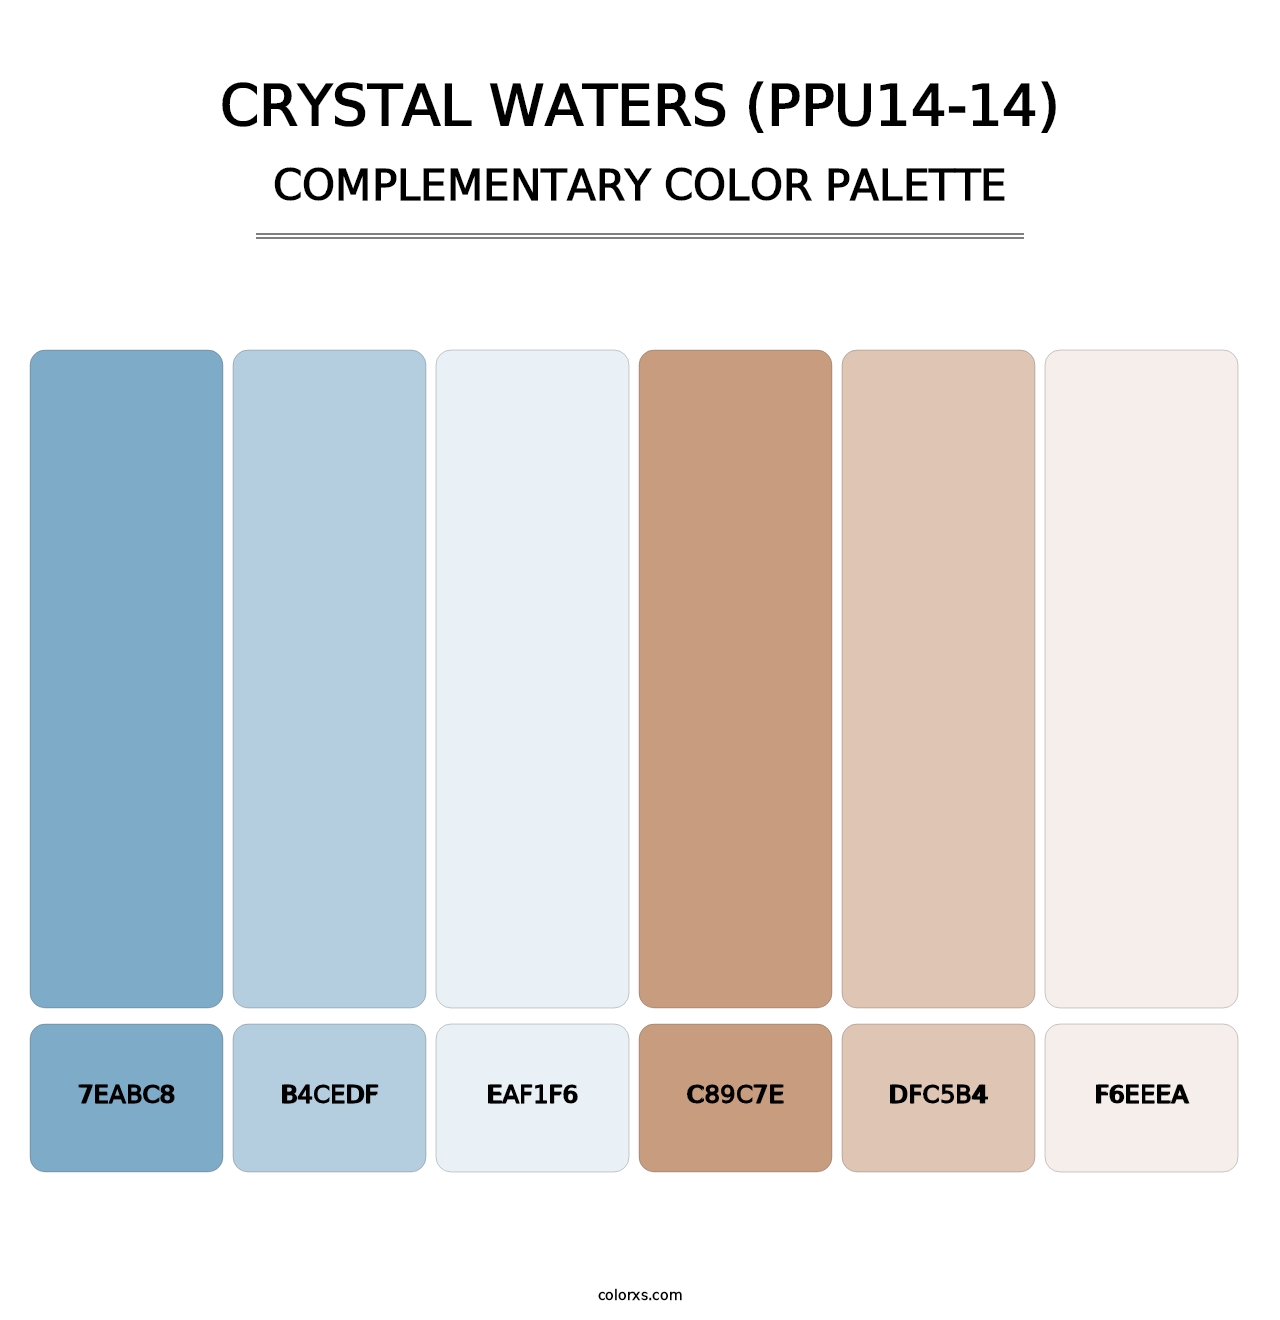 Crystal Waters (PPU14-14) - Complementary Color Palette